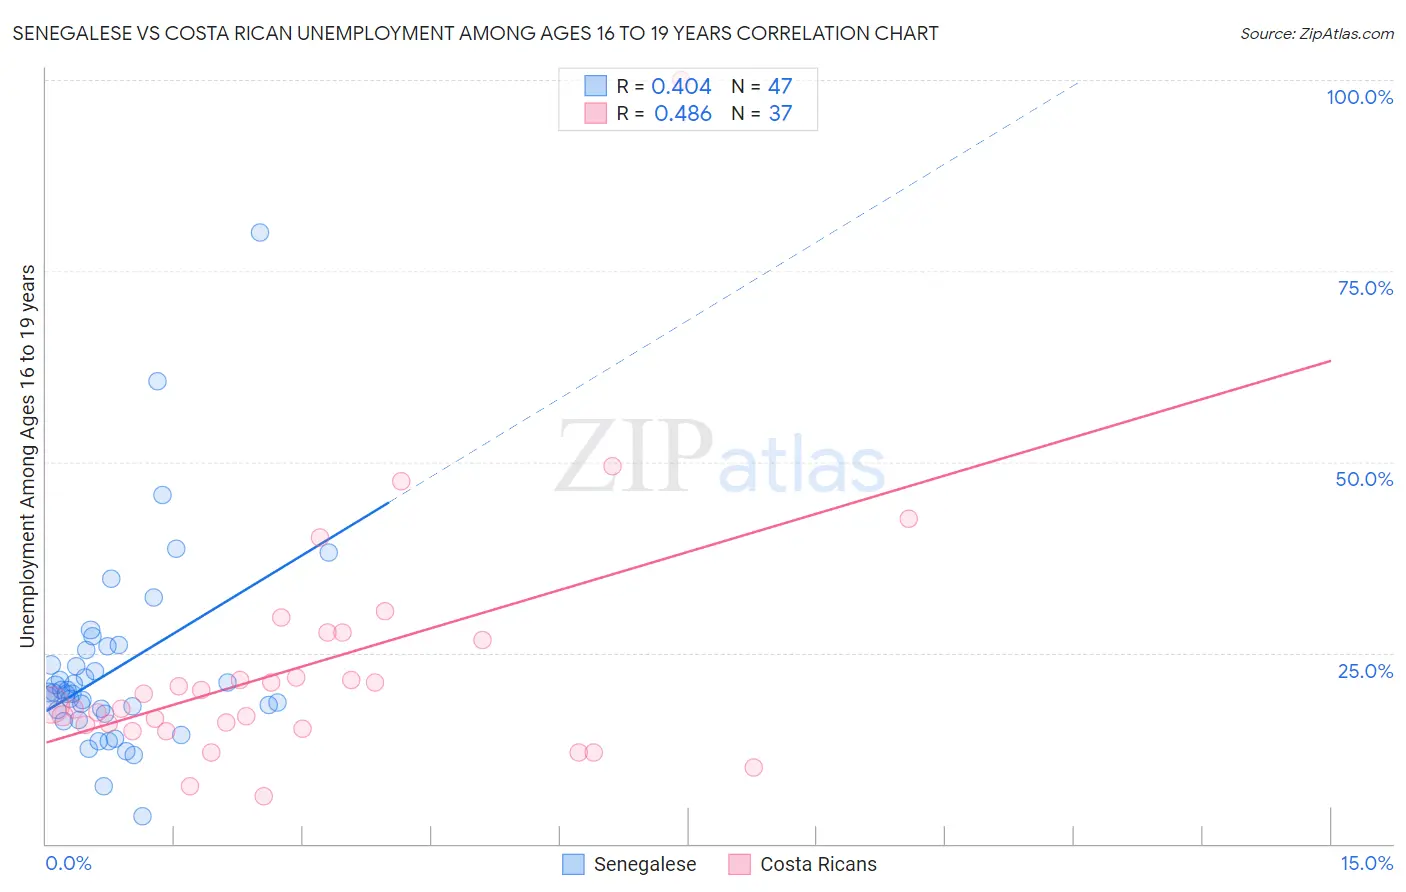 Senegalese vs Costa Rican Unemployment Among Ages 16 to 19 years